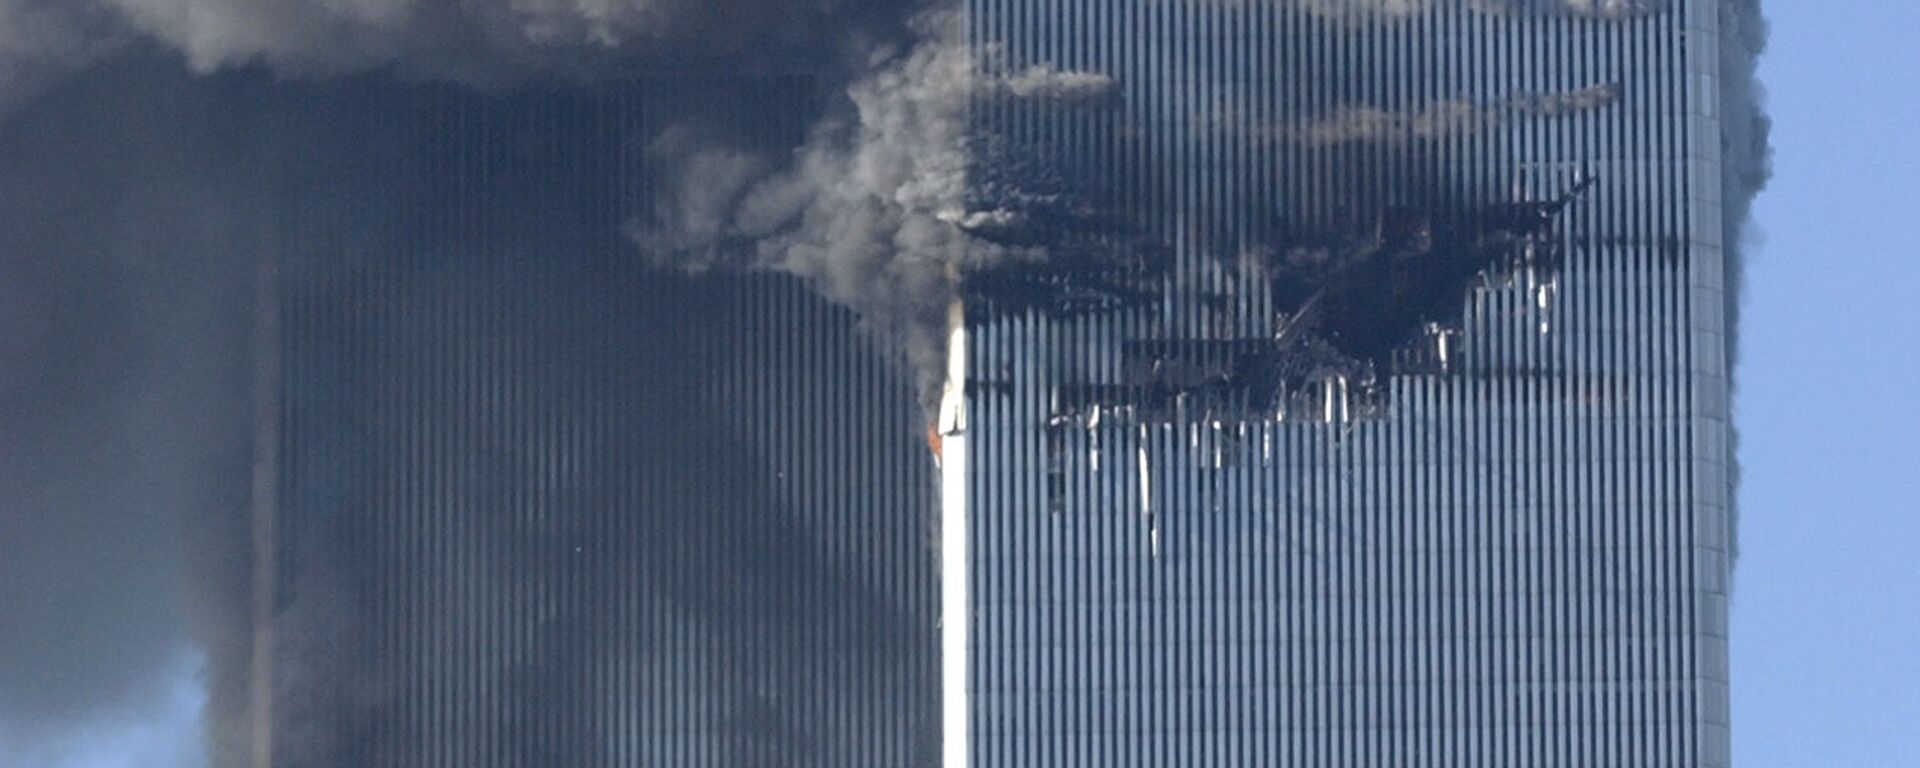 Smoke billows from the North and South Towers of the World Trade Center before they collapsed on September 11, 2001 in New York, NY - Sputnik International, 1920, 11.09.2021